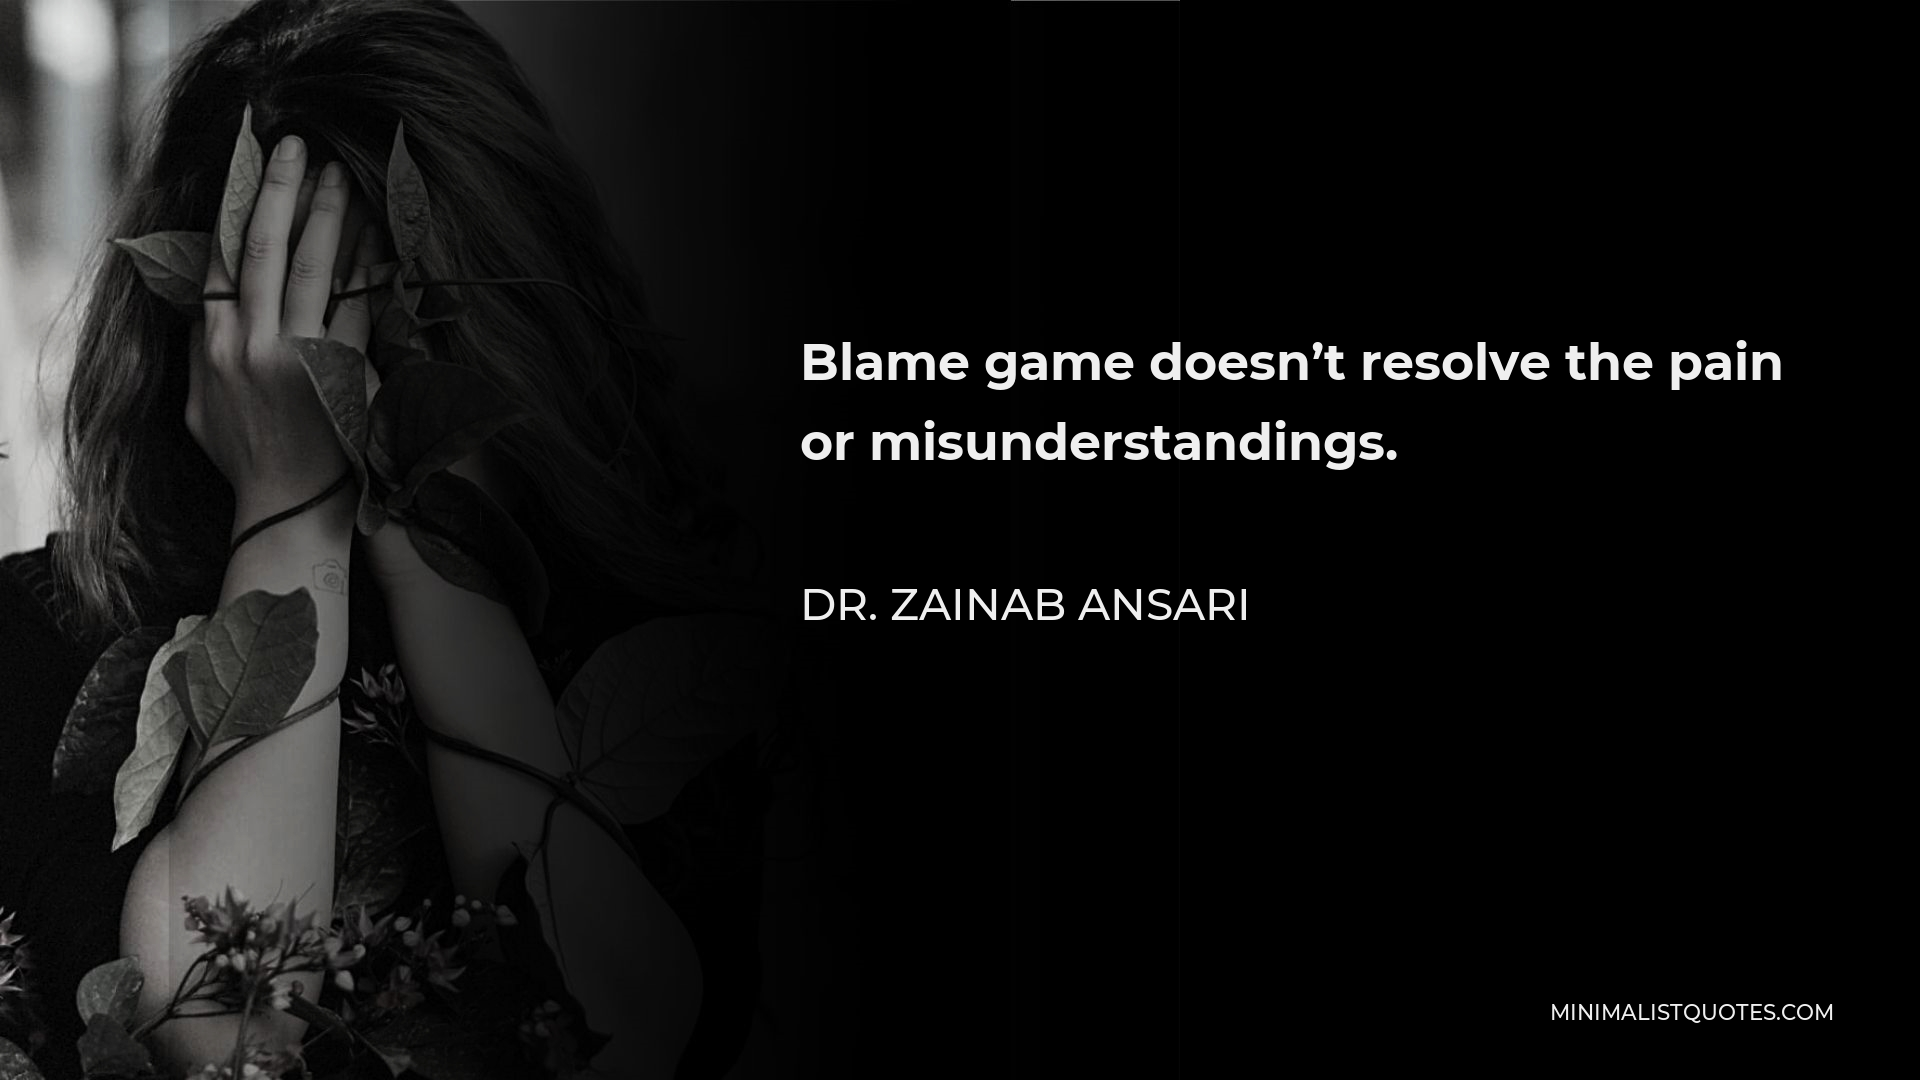 Dr. Zainab Ansari Quote - Blame game doesn’t resolve the pain or misunderstandings.